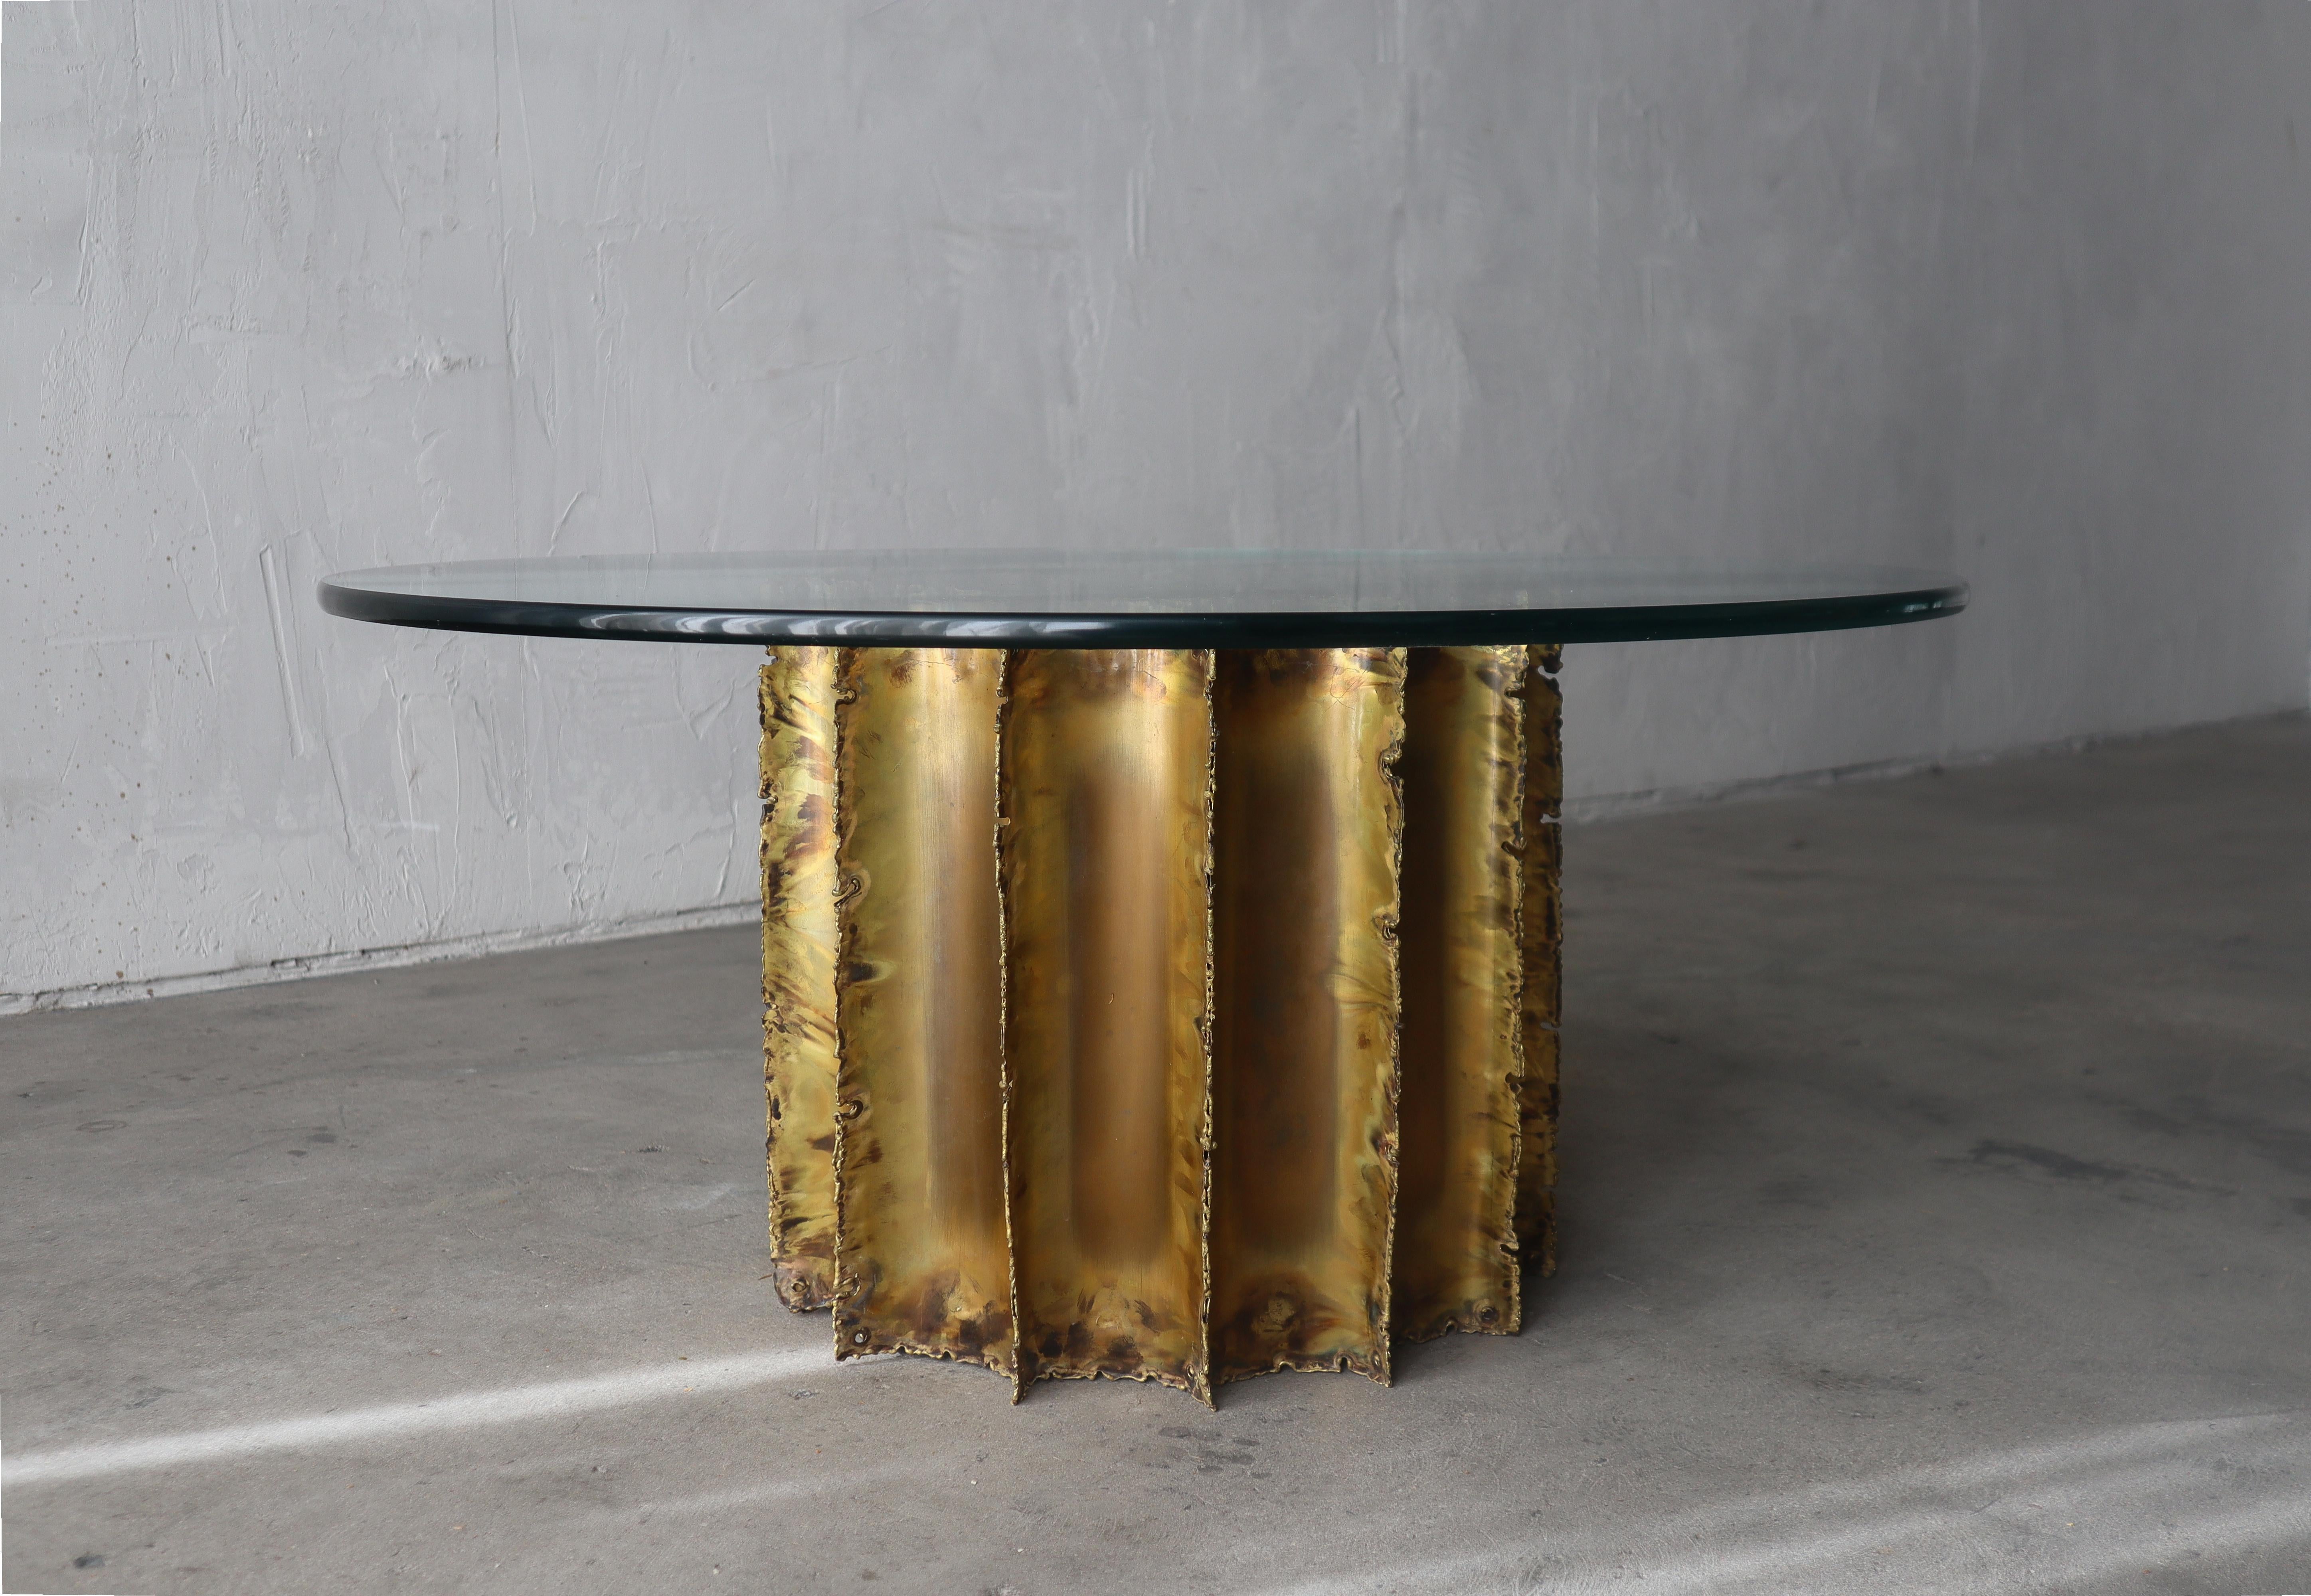 Great Brutalist style, torch cut brass, coffee table base by Tom Greene with nice glass top. These pieces add an elegant, textural element to any space. 

Glass shown is 36